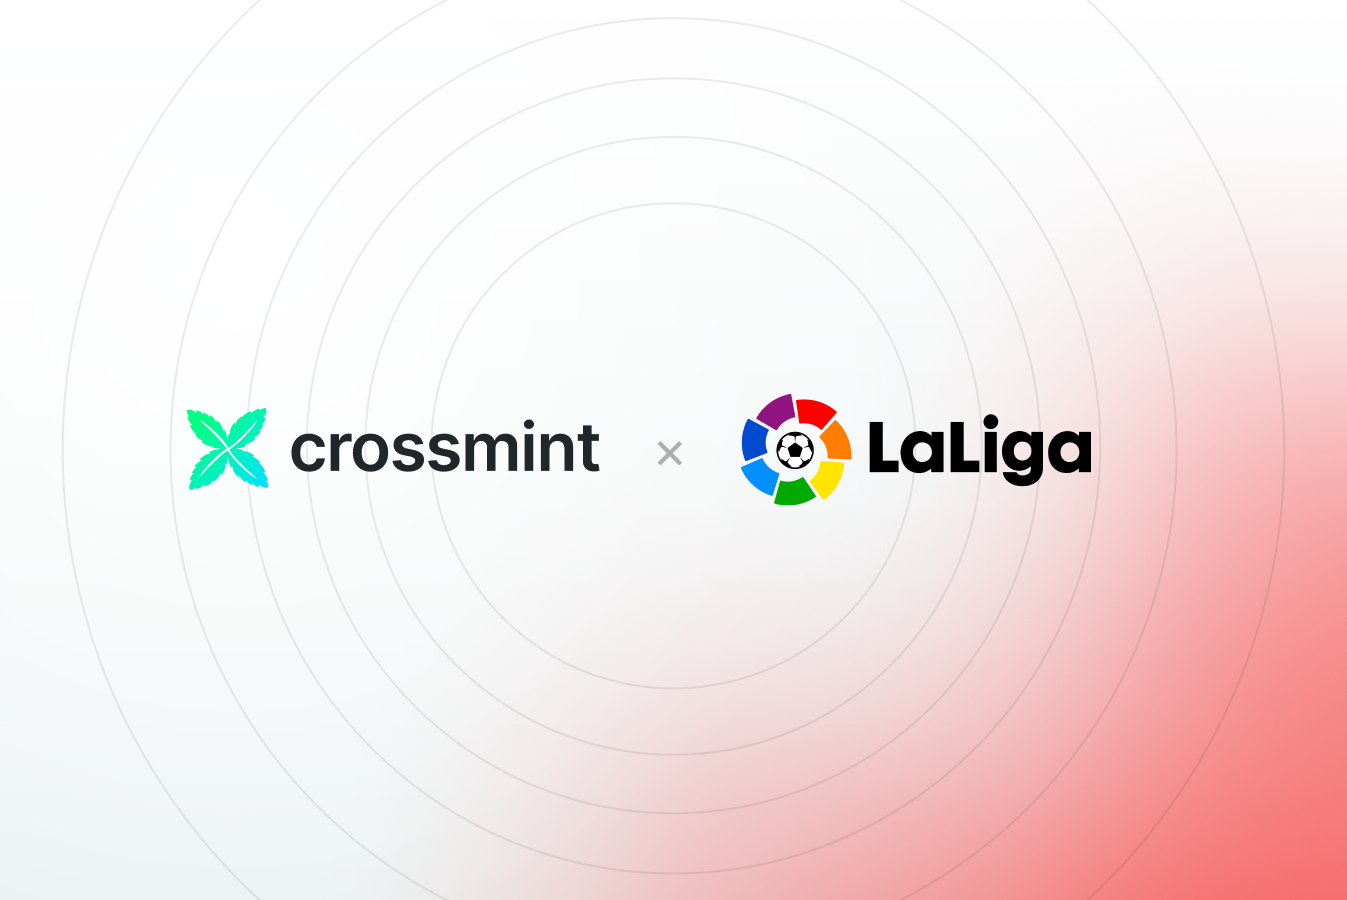 Crossmint Partners with LaLiga to Bring Soccer to the Metaverse